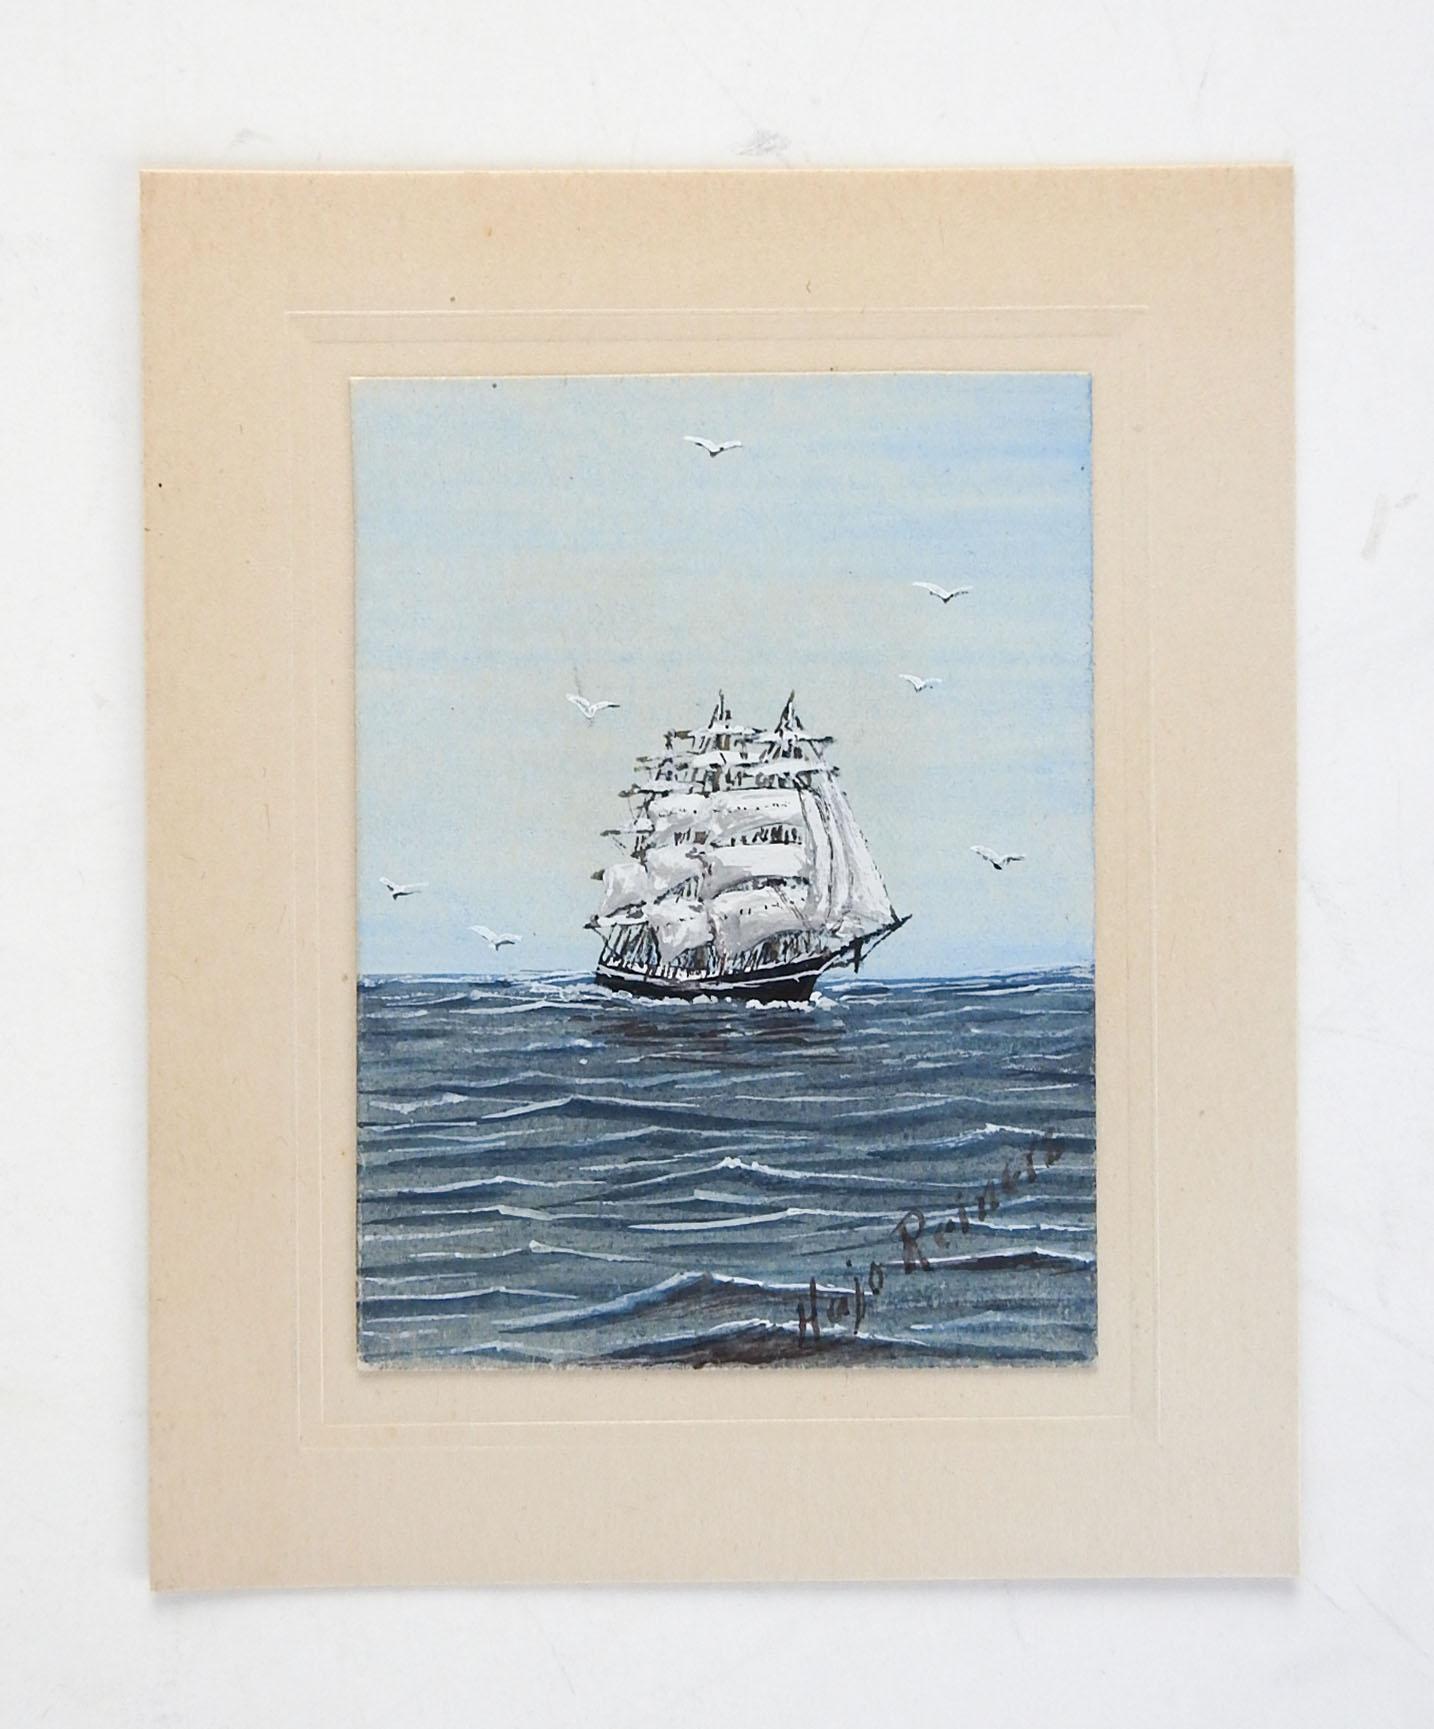 Miniature watercolor on paper of a sailing ship sailboat by Hajo Reiners (20th Century) Texas. Signed lower right. Painting is 2.25' x 3